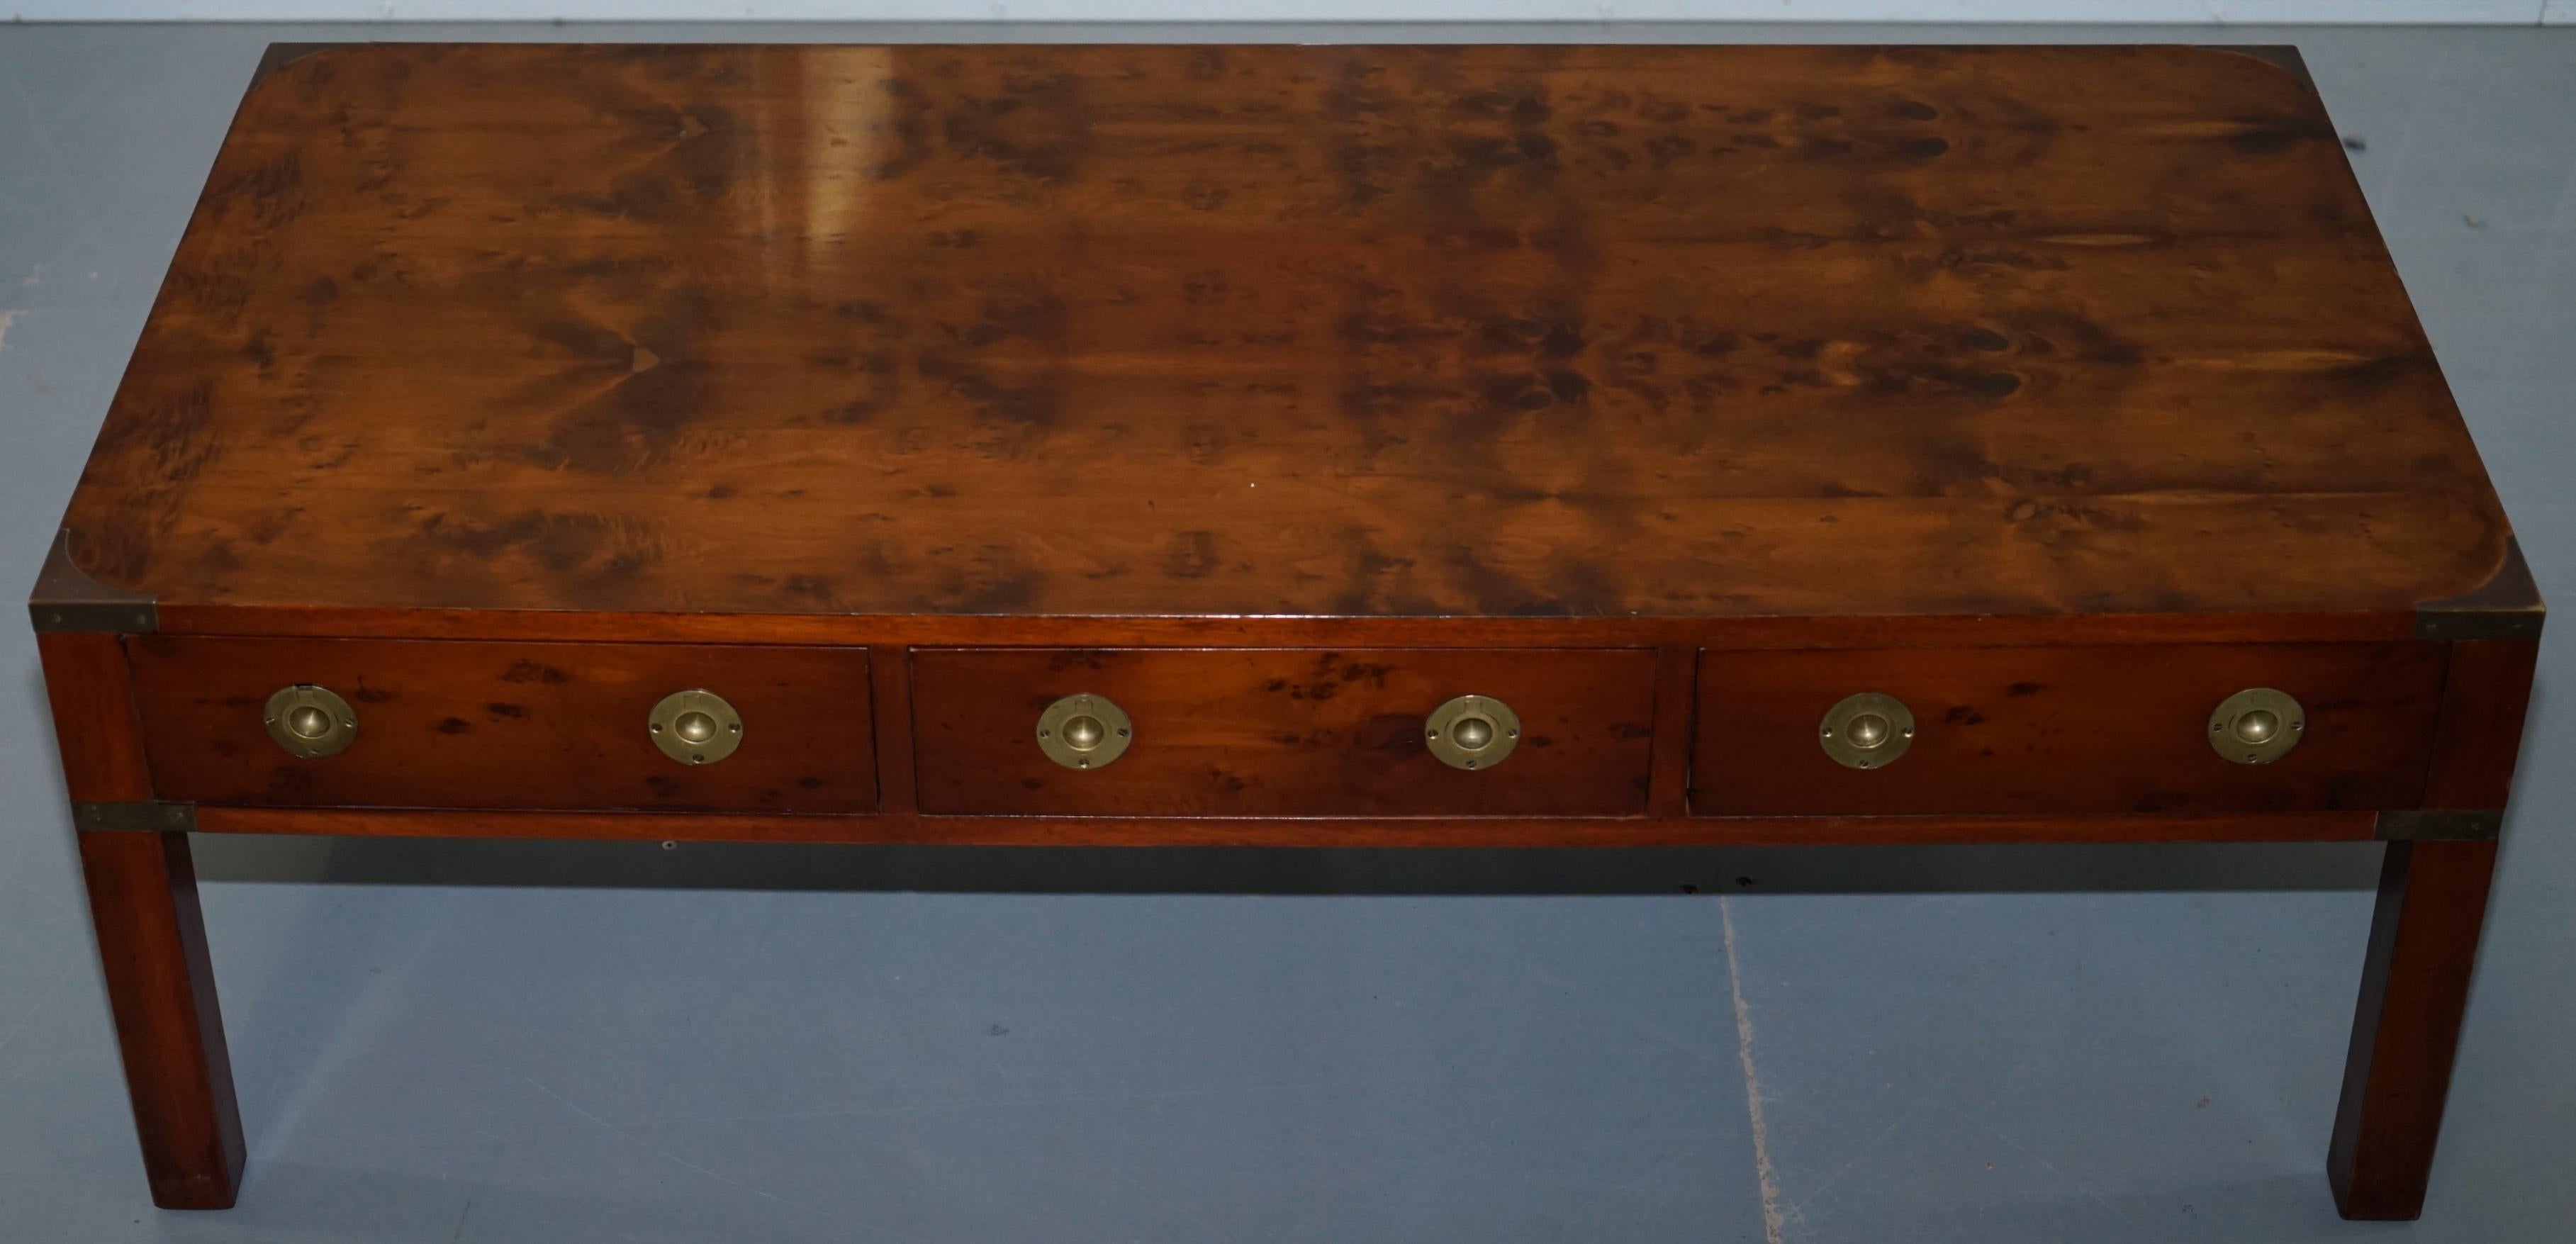 We are delighted to offer for sale this lovely solid Harrods London Kennedy Furniture Burr Yew military campaign coffee table with full-sized drawers 

A rare find in lovely lightly restored condition, we have deep cleaned hand condition waxed and